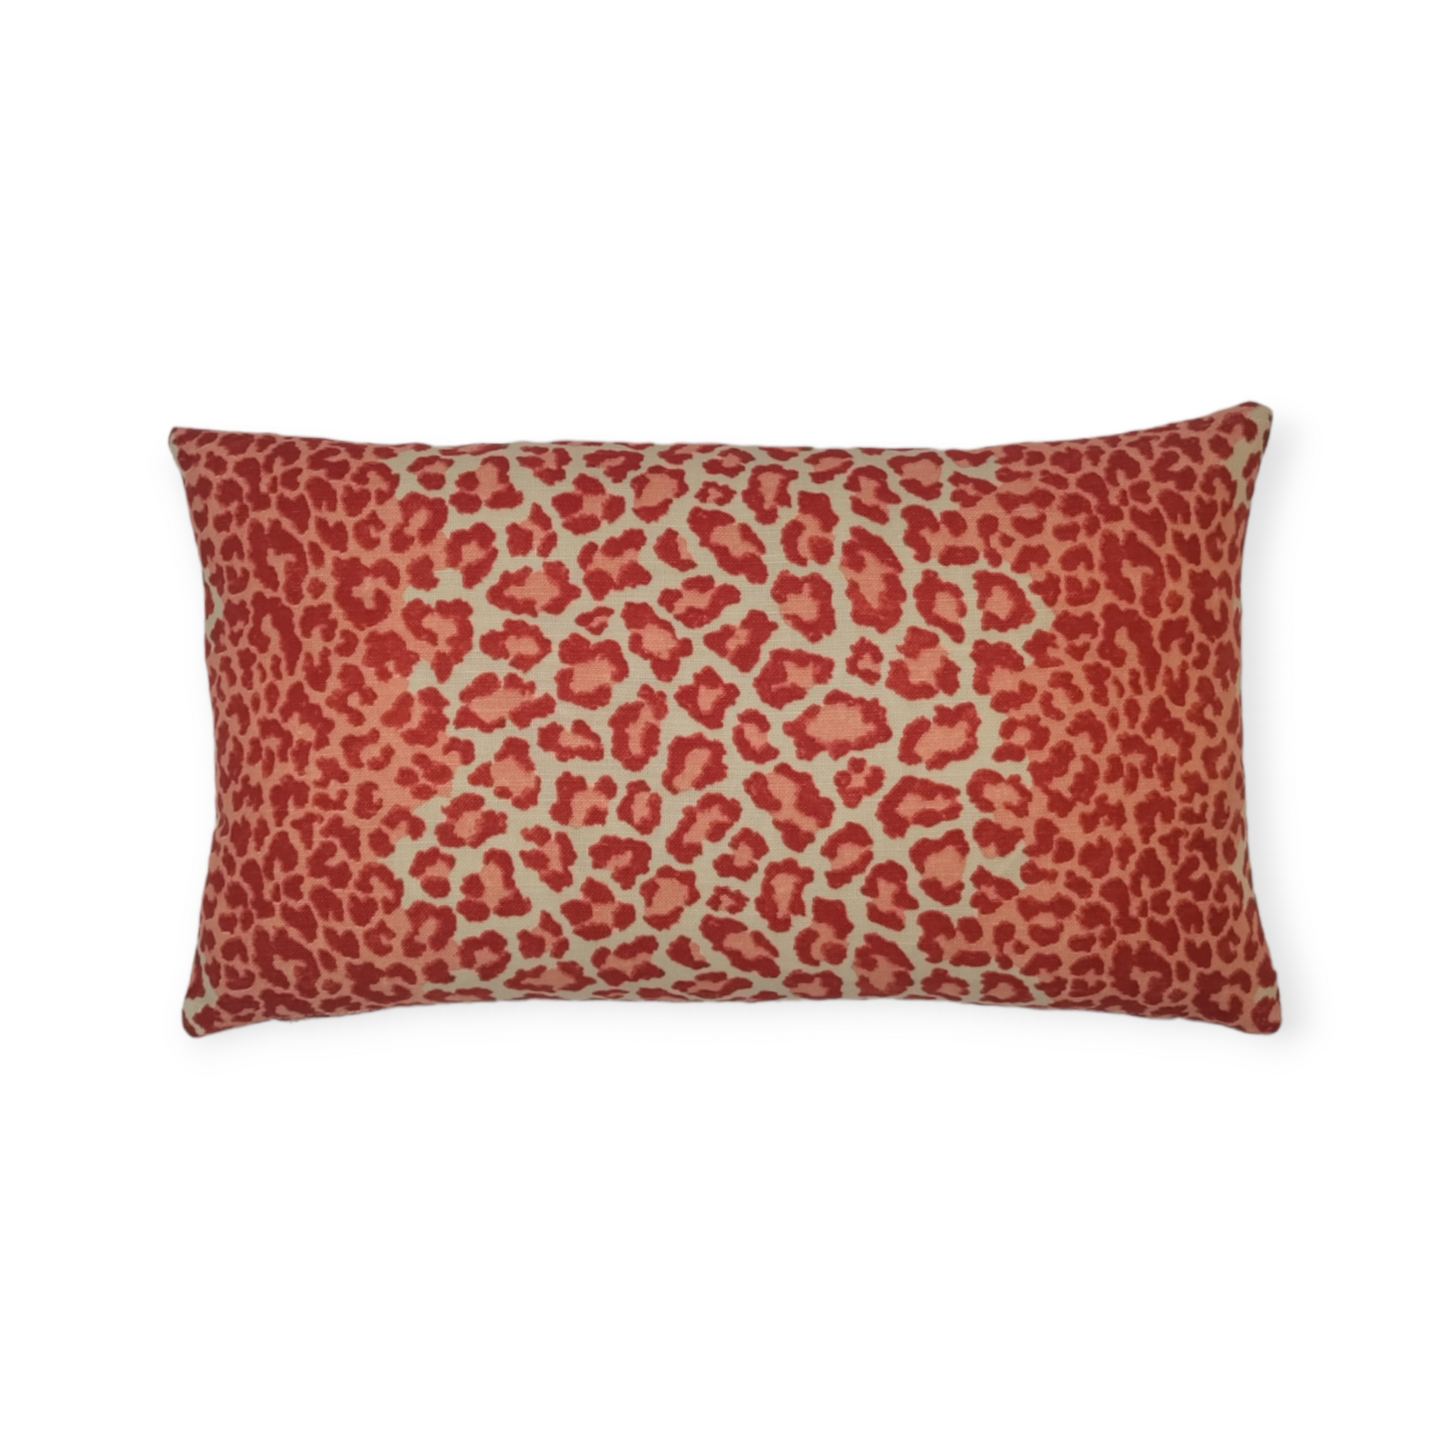 Colefax & Fowler Panthera Red Cushion